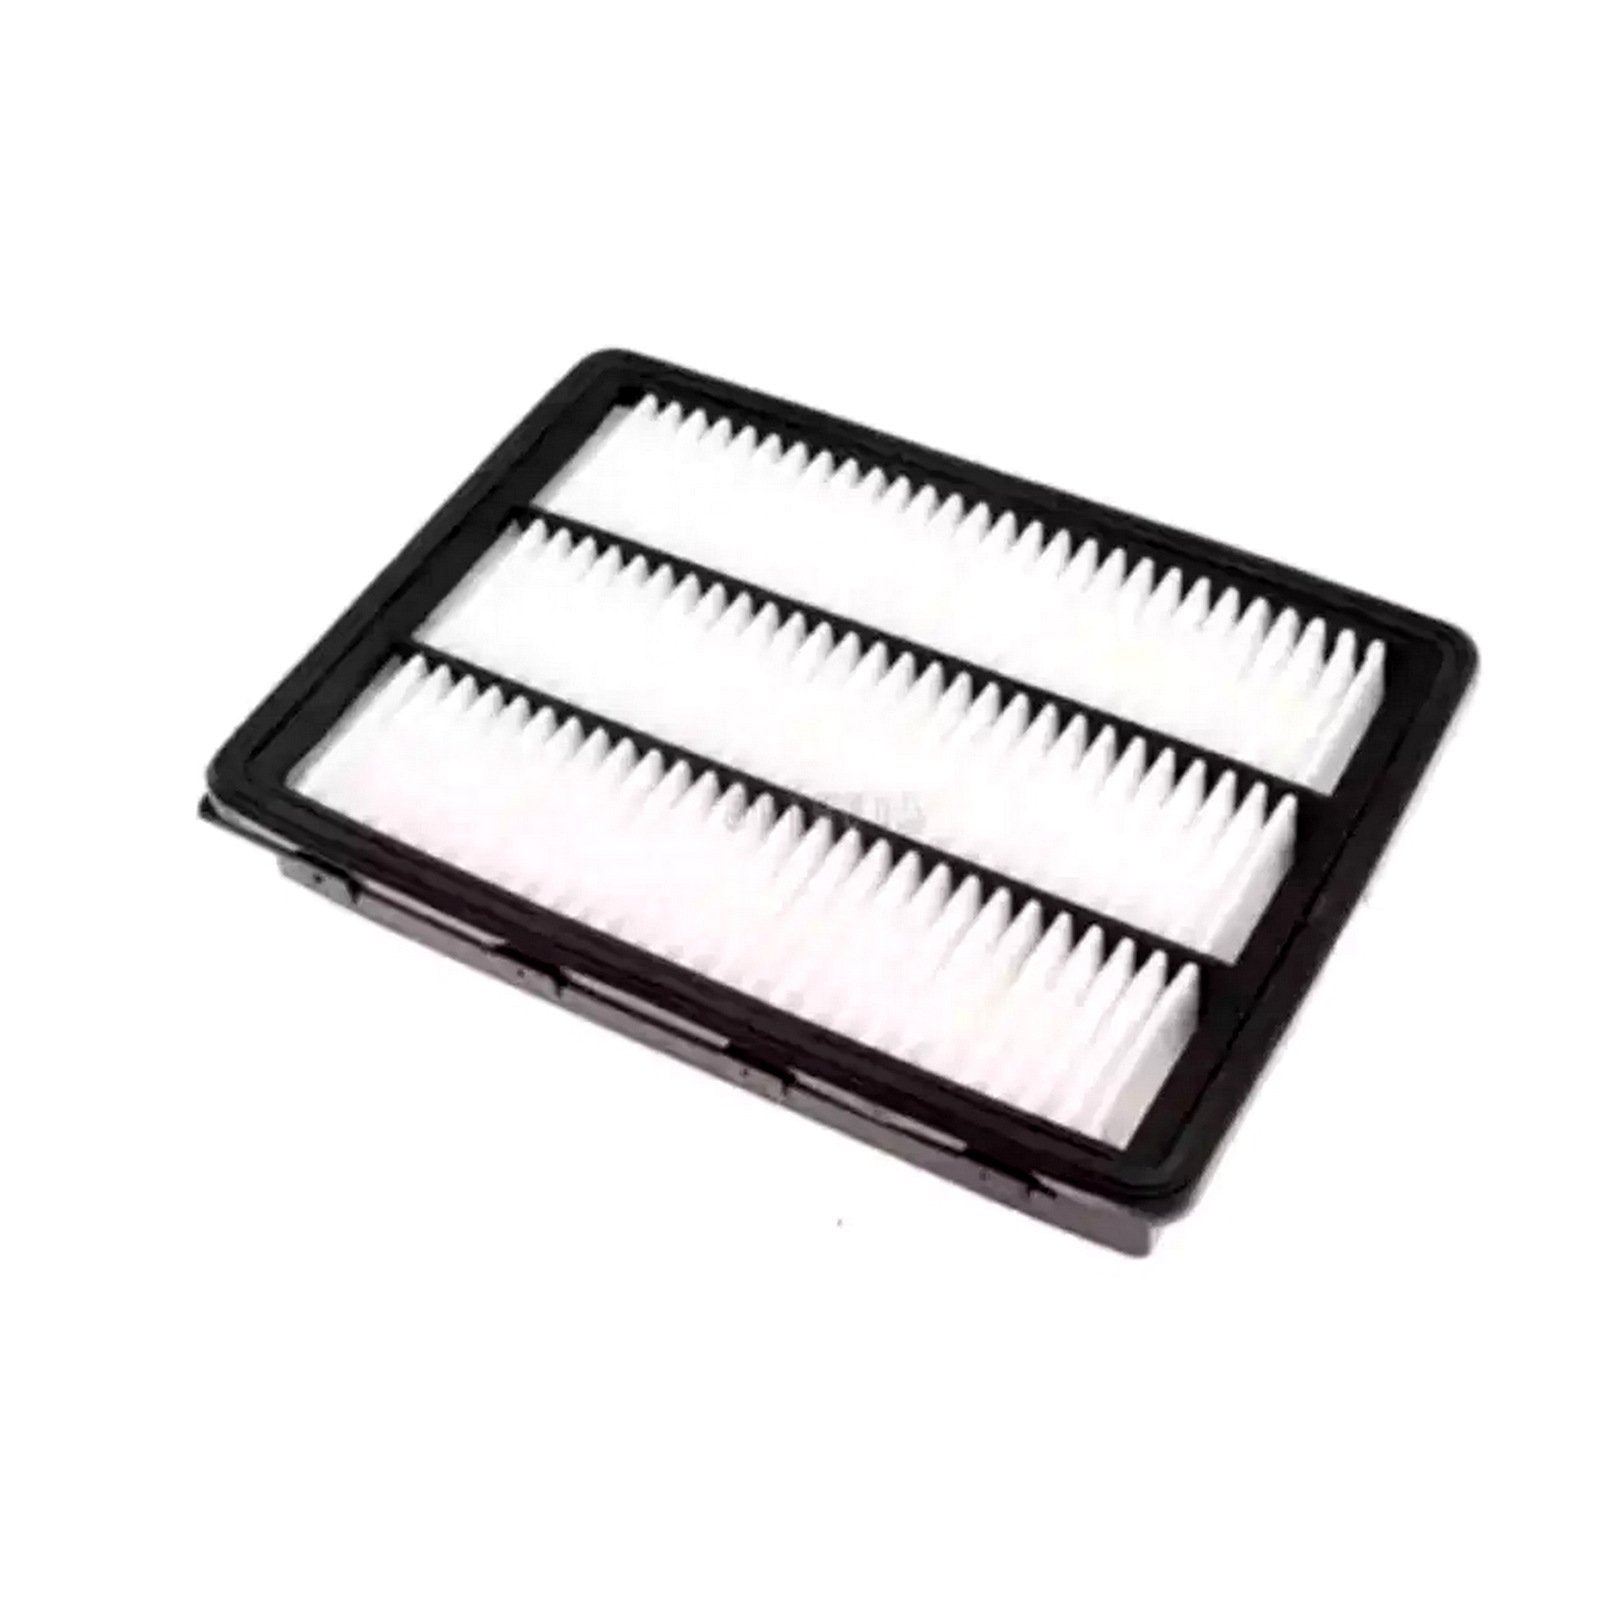 AIR FILTER ELEMENT SUB ASSY FOR HYUNDAI TUCSON (IMPORTED)